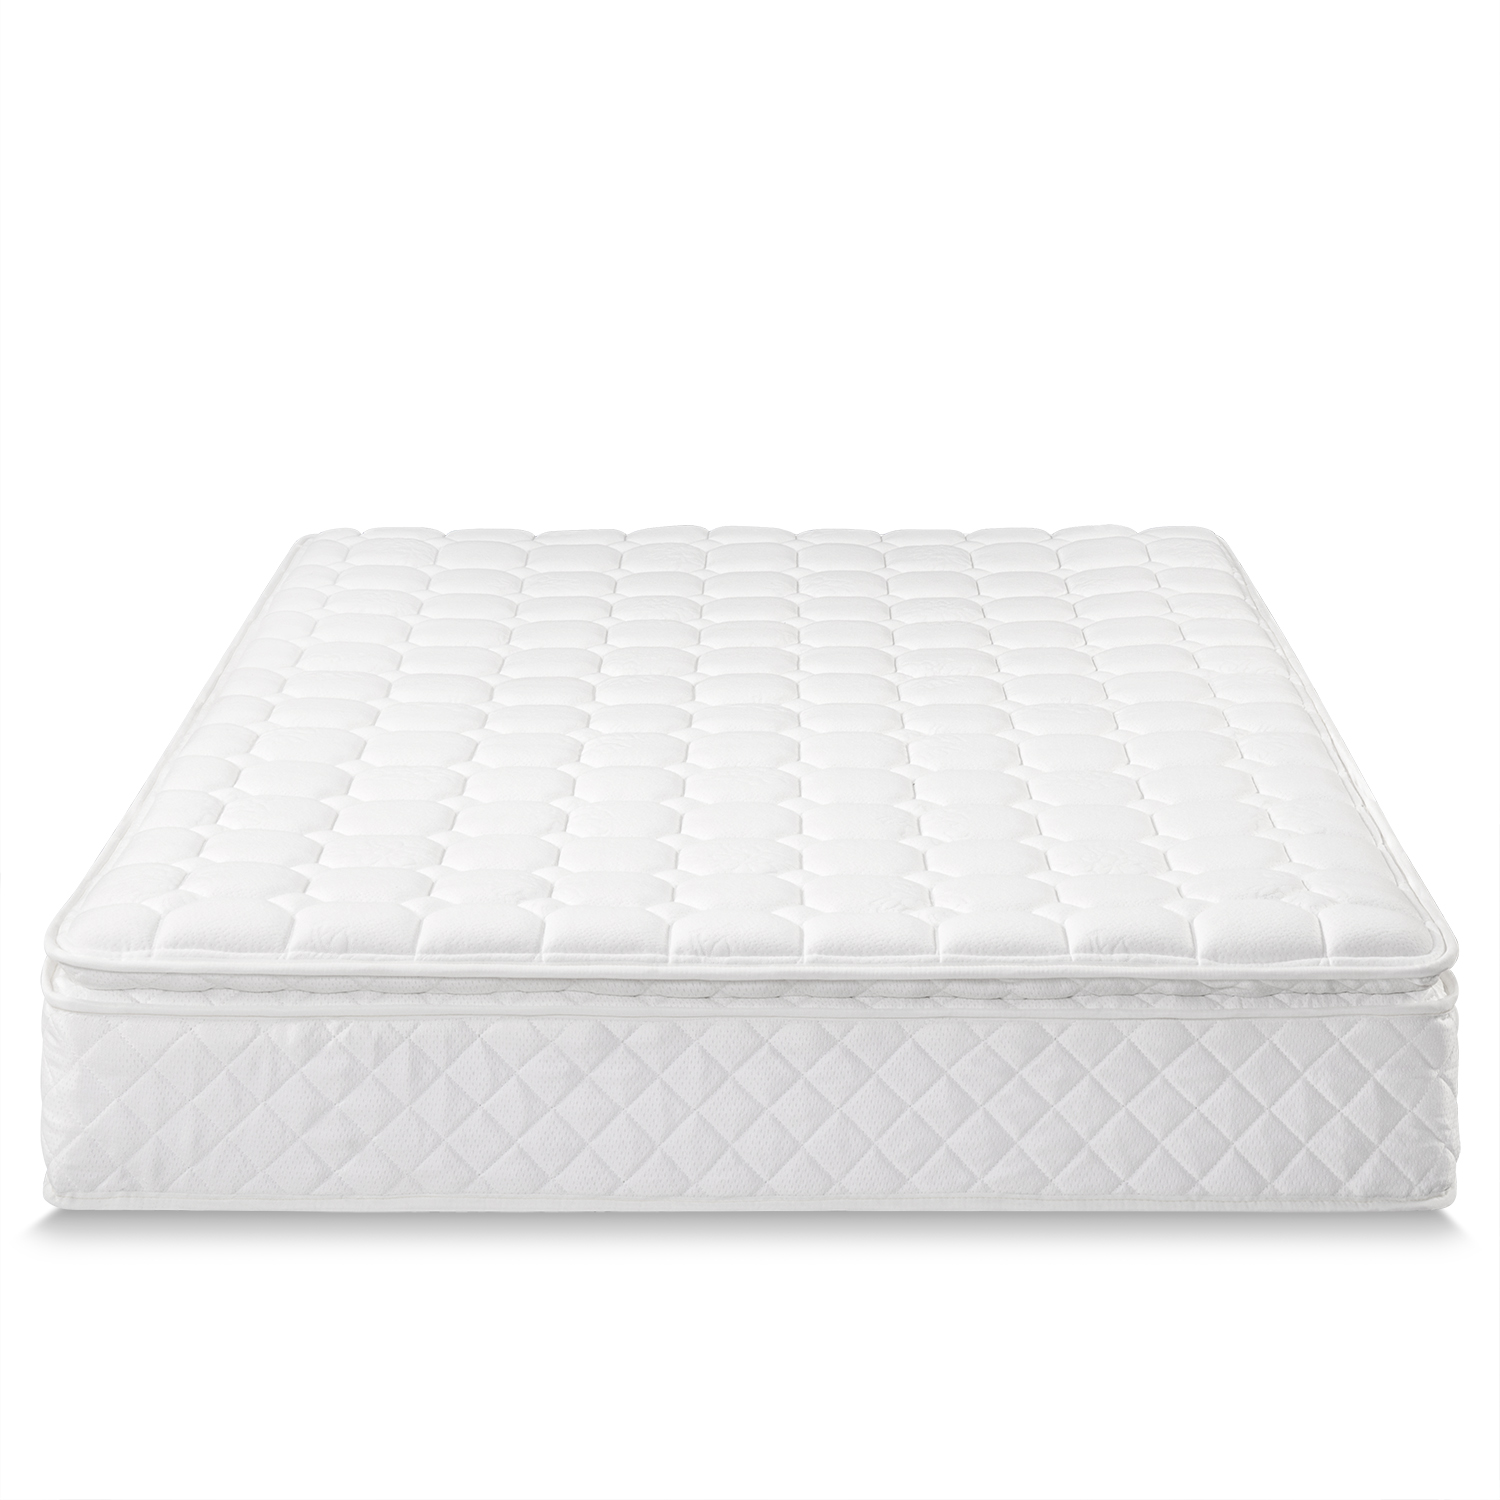 10" Hybrid of Comfort Foam and Pocket Spring Mattress, Twin - image 1 of 5